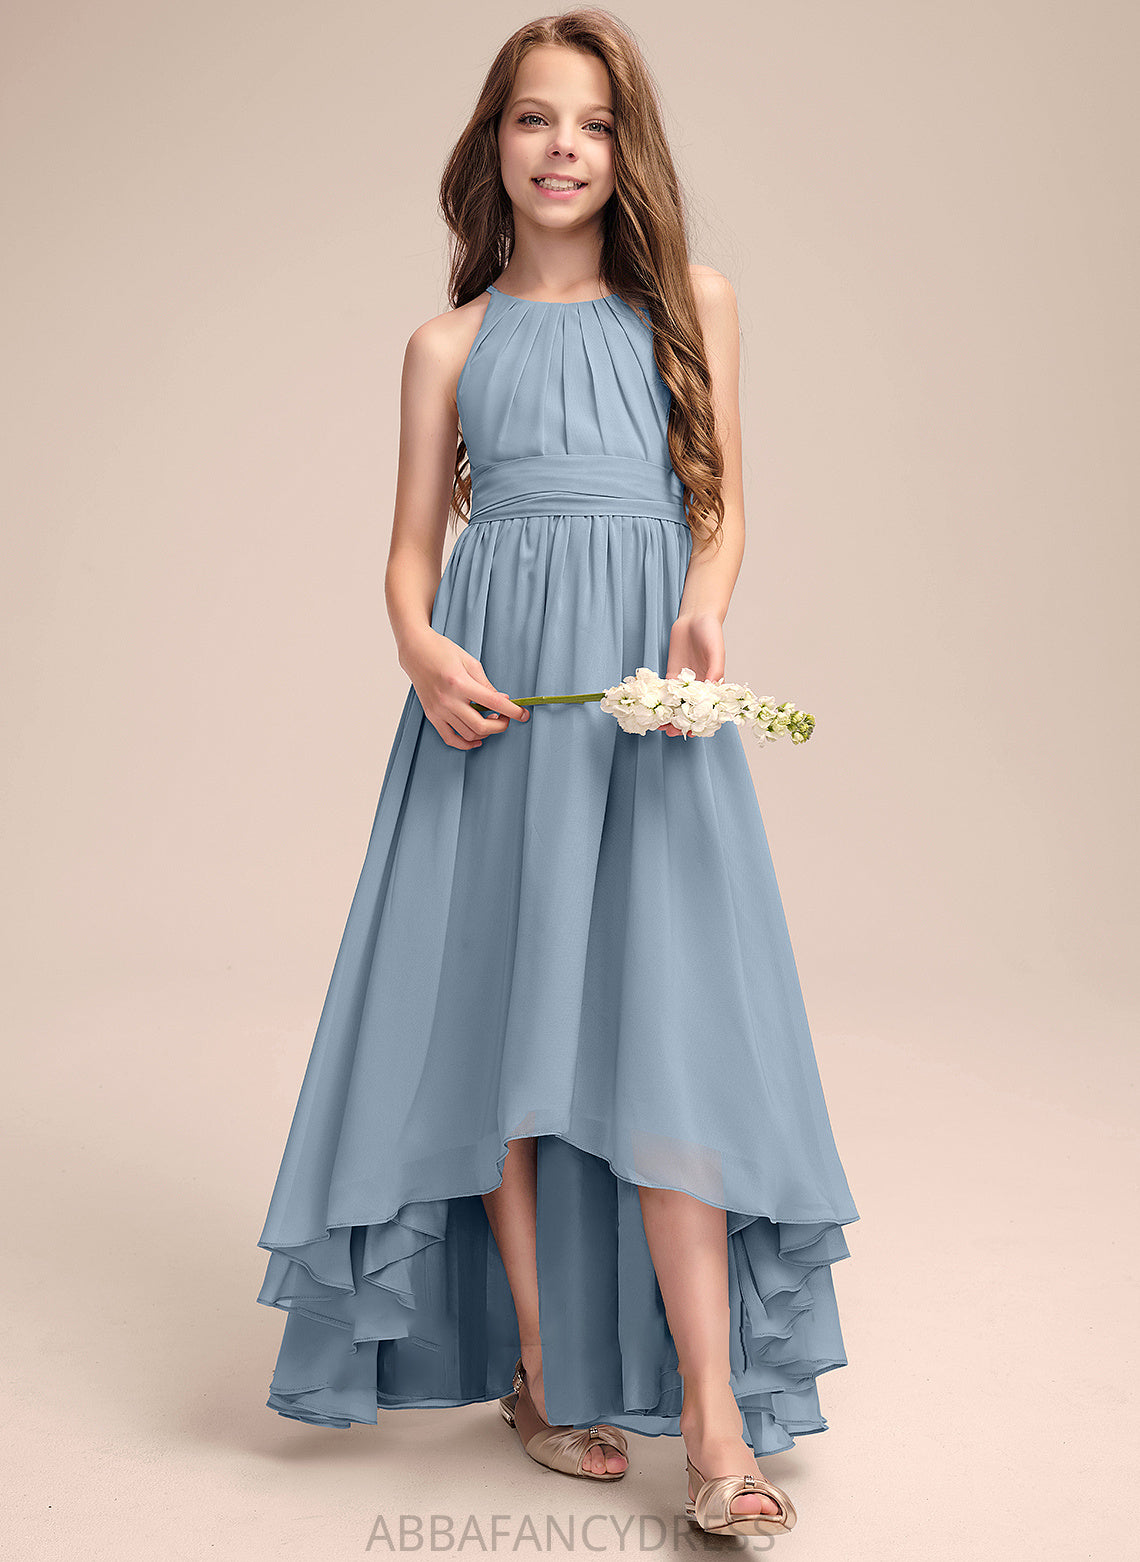 Scoop Junior Bridesmaid Dresses Bow(s) Ruffle Chiffon With Asymmetrical A-Line Lydia Neck